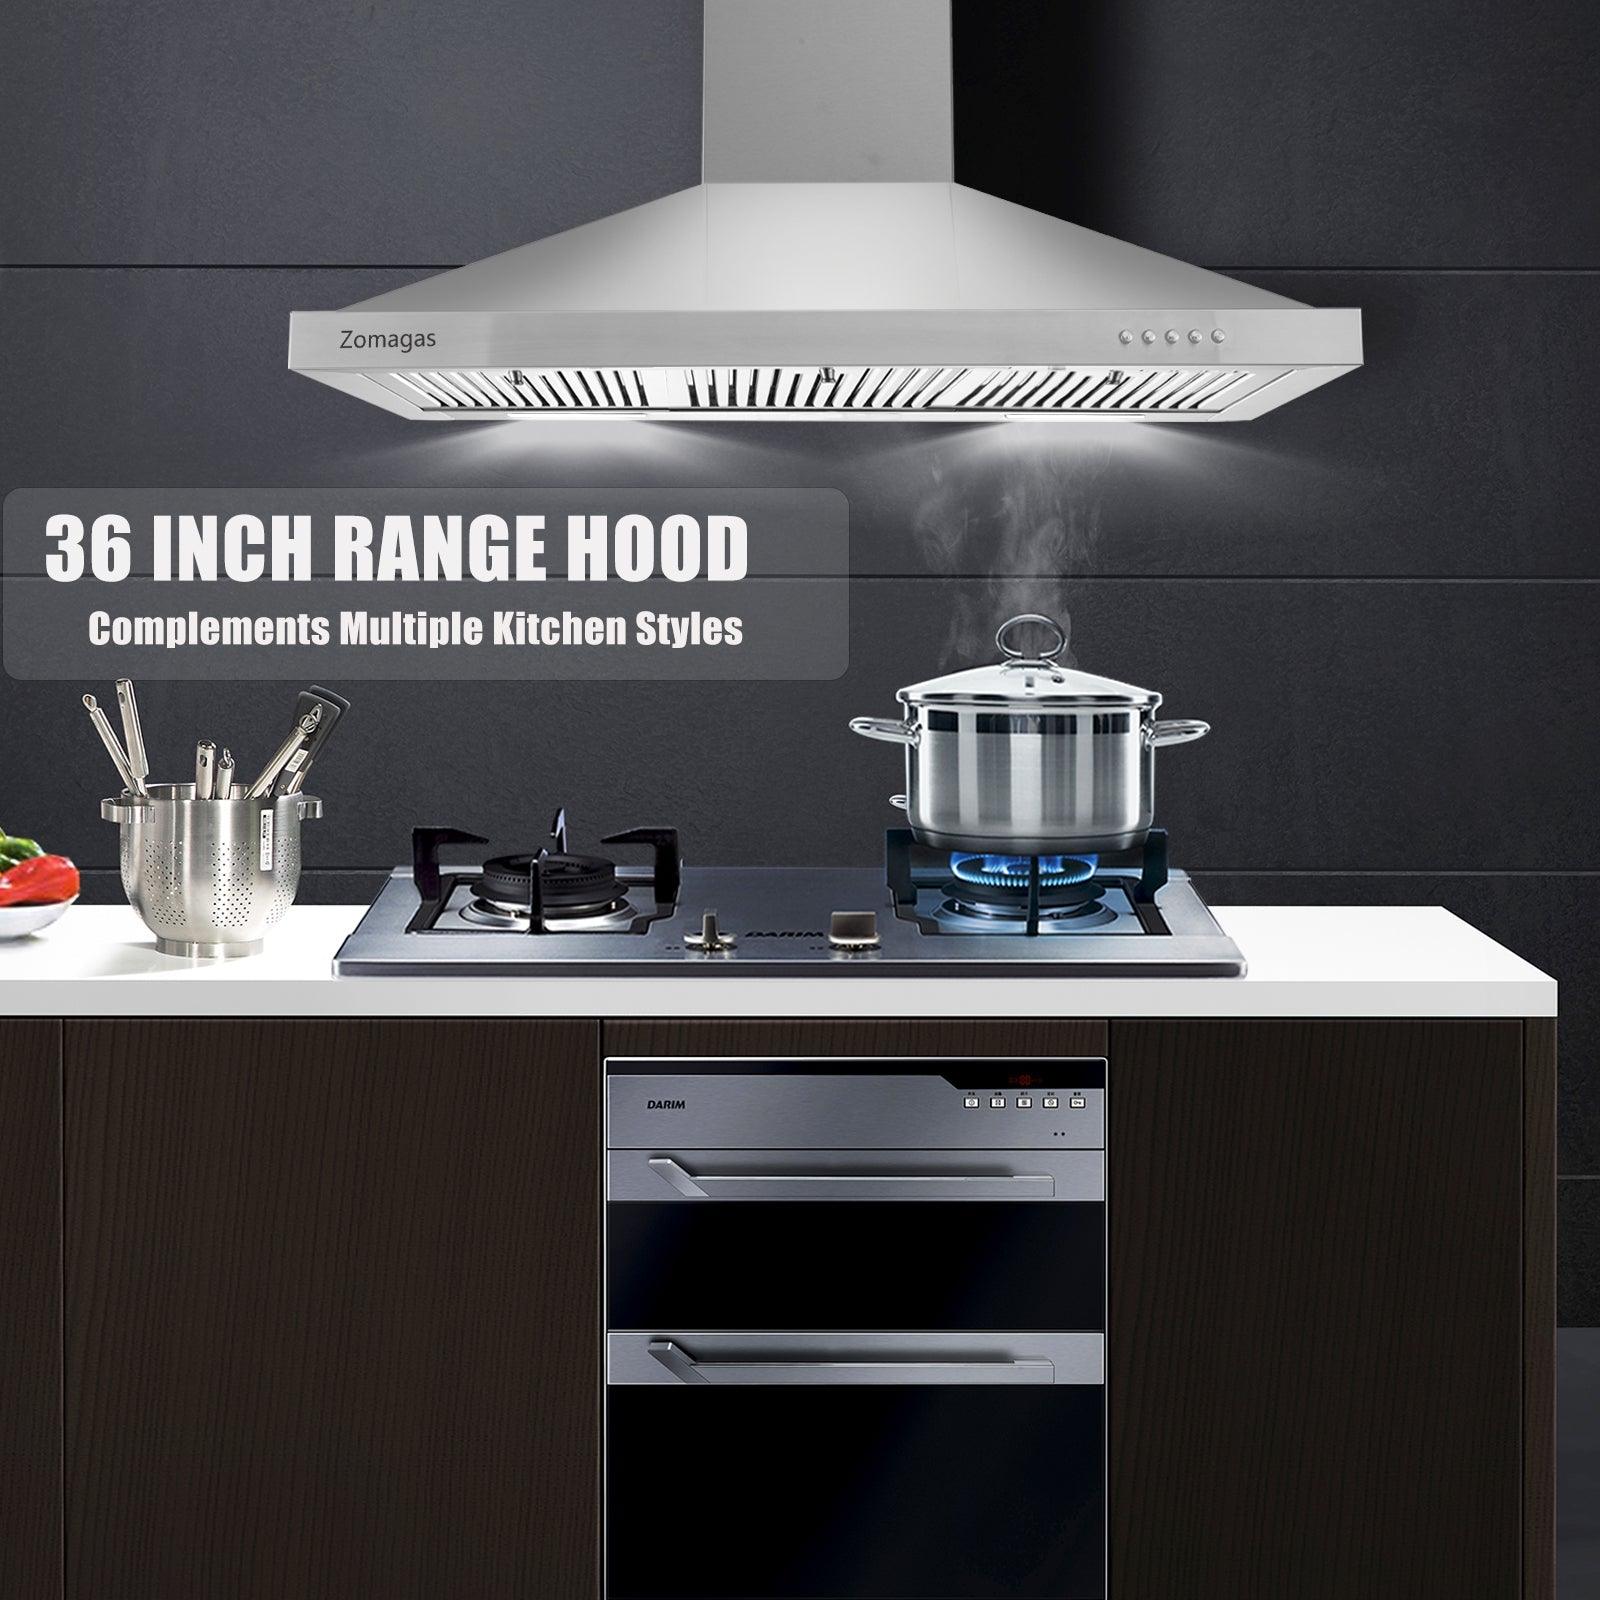 Tieasy 36 Inch Wall Mount Range Hood 3 filters and 2 x 2W LED Lights 